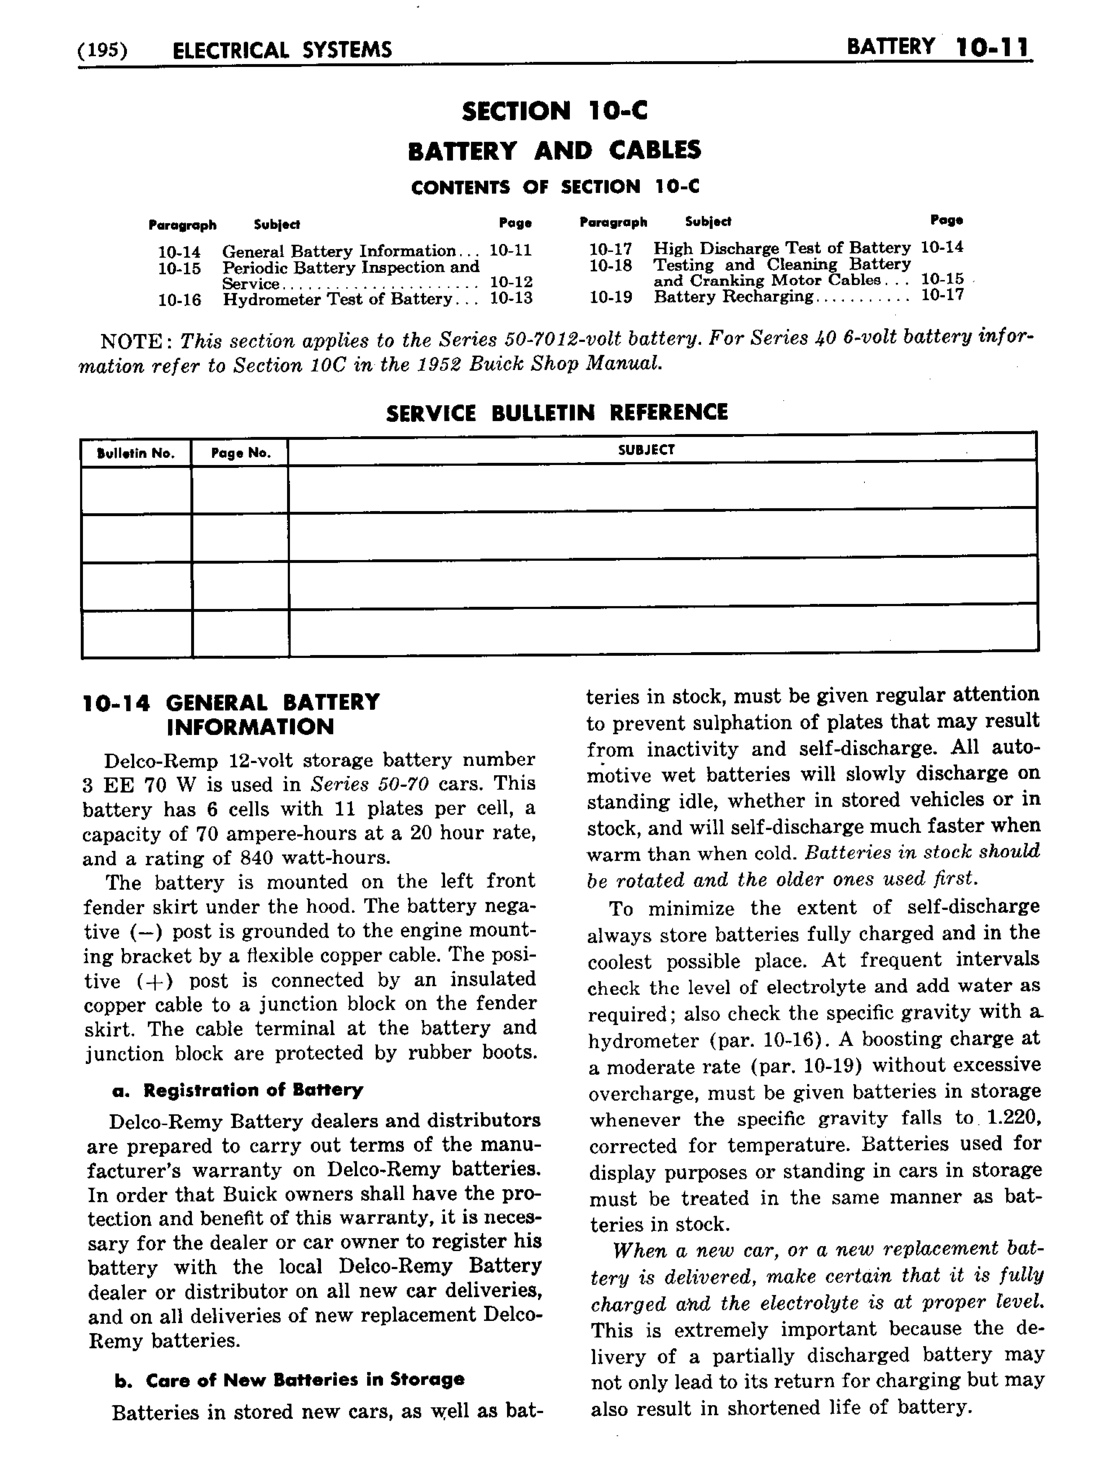 n_11 1953 Buick Shop Manual - Electrical Systems-011-011.jpg